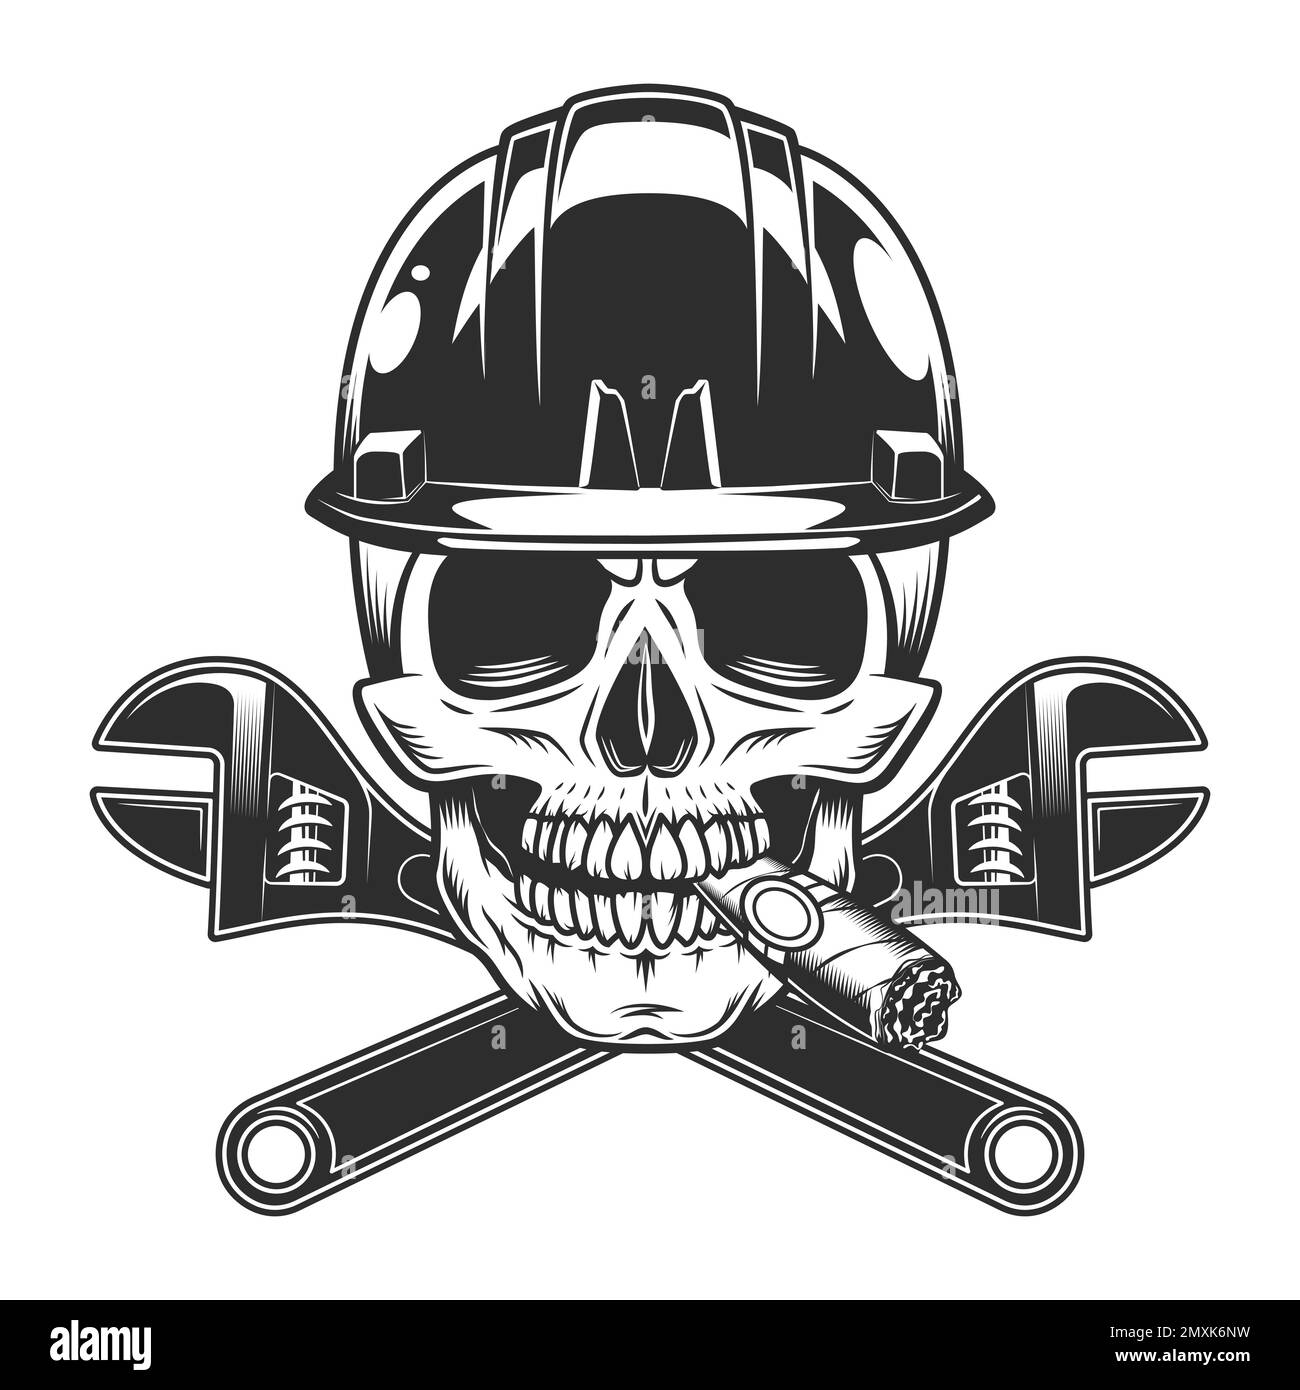 Builder skull skull smoking cigar or cigarette smoke in hard hat with crossed plumbing wrench from business new construction and remodeling house vint Stock Vector